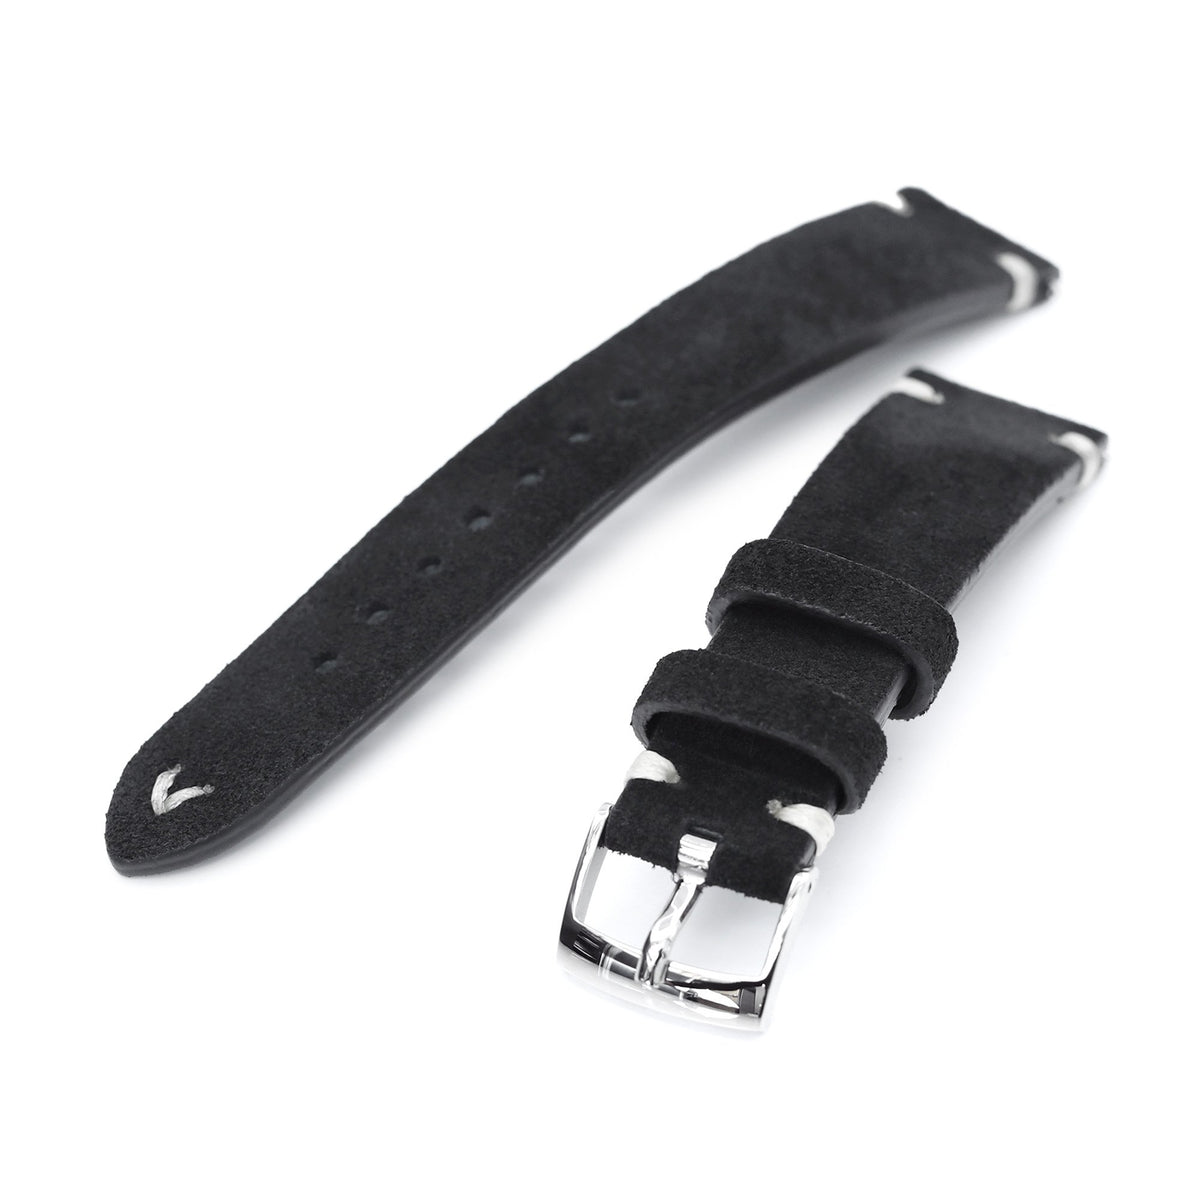 20mm Black Quick Release Italian Suede Leather Watch Strap Beige St. Strapcode Watch Bands